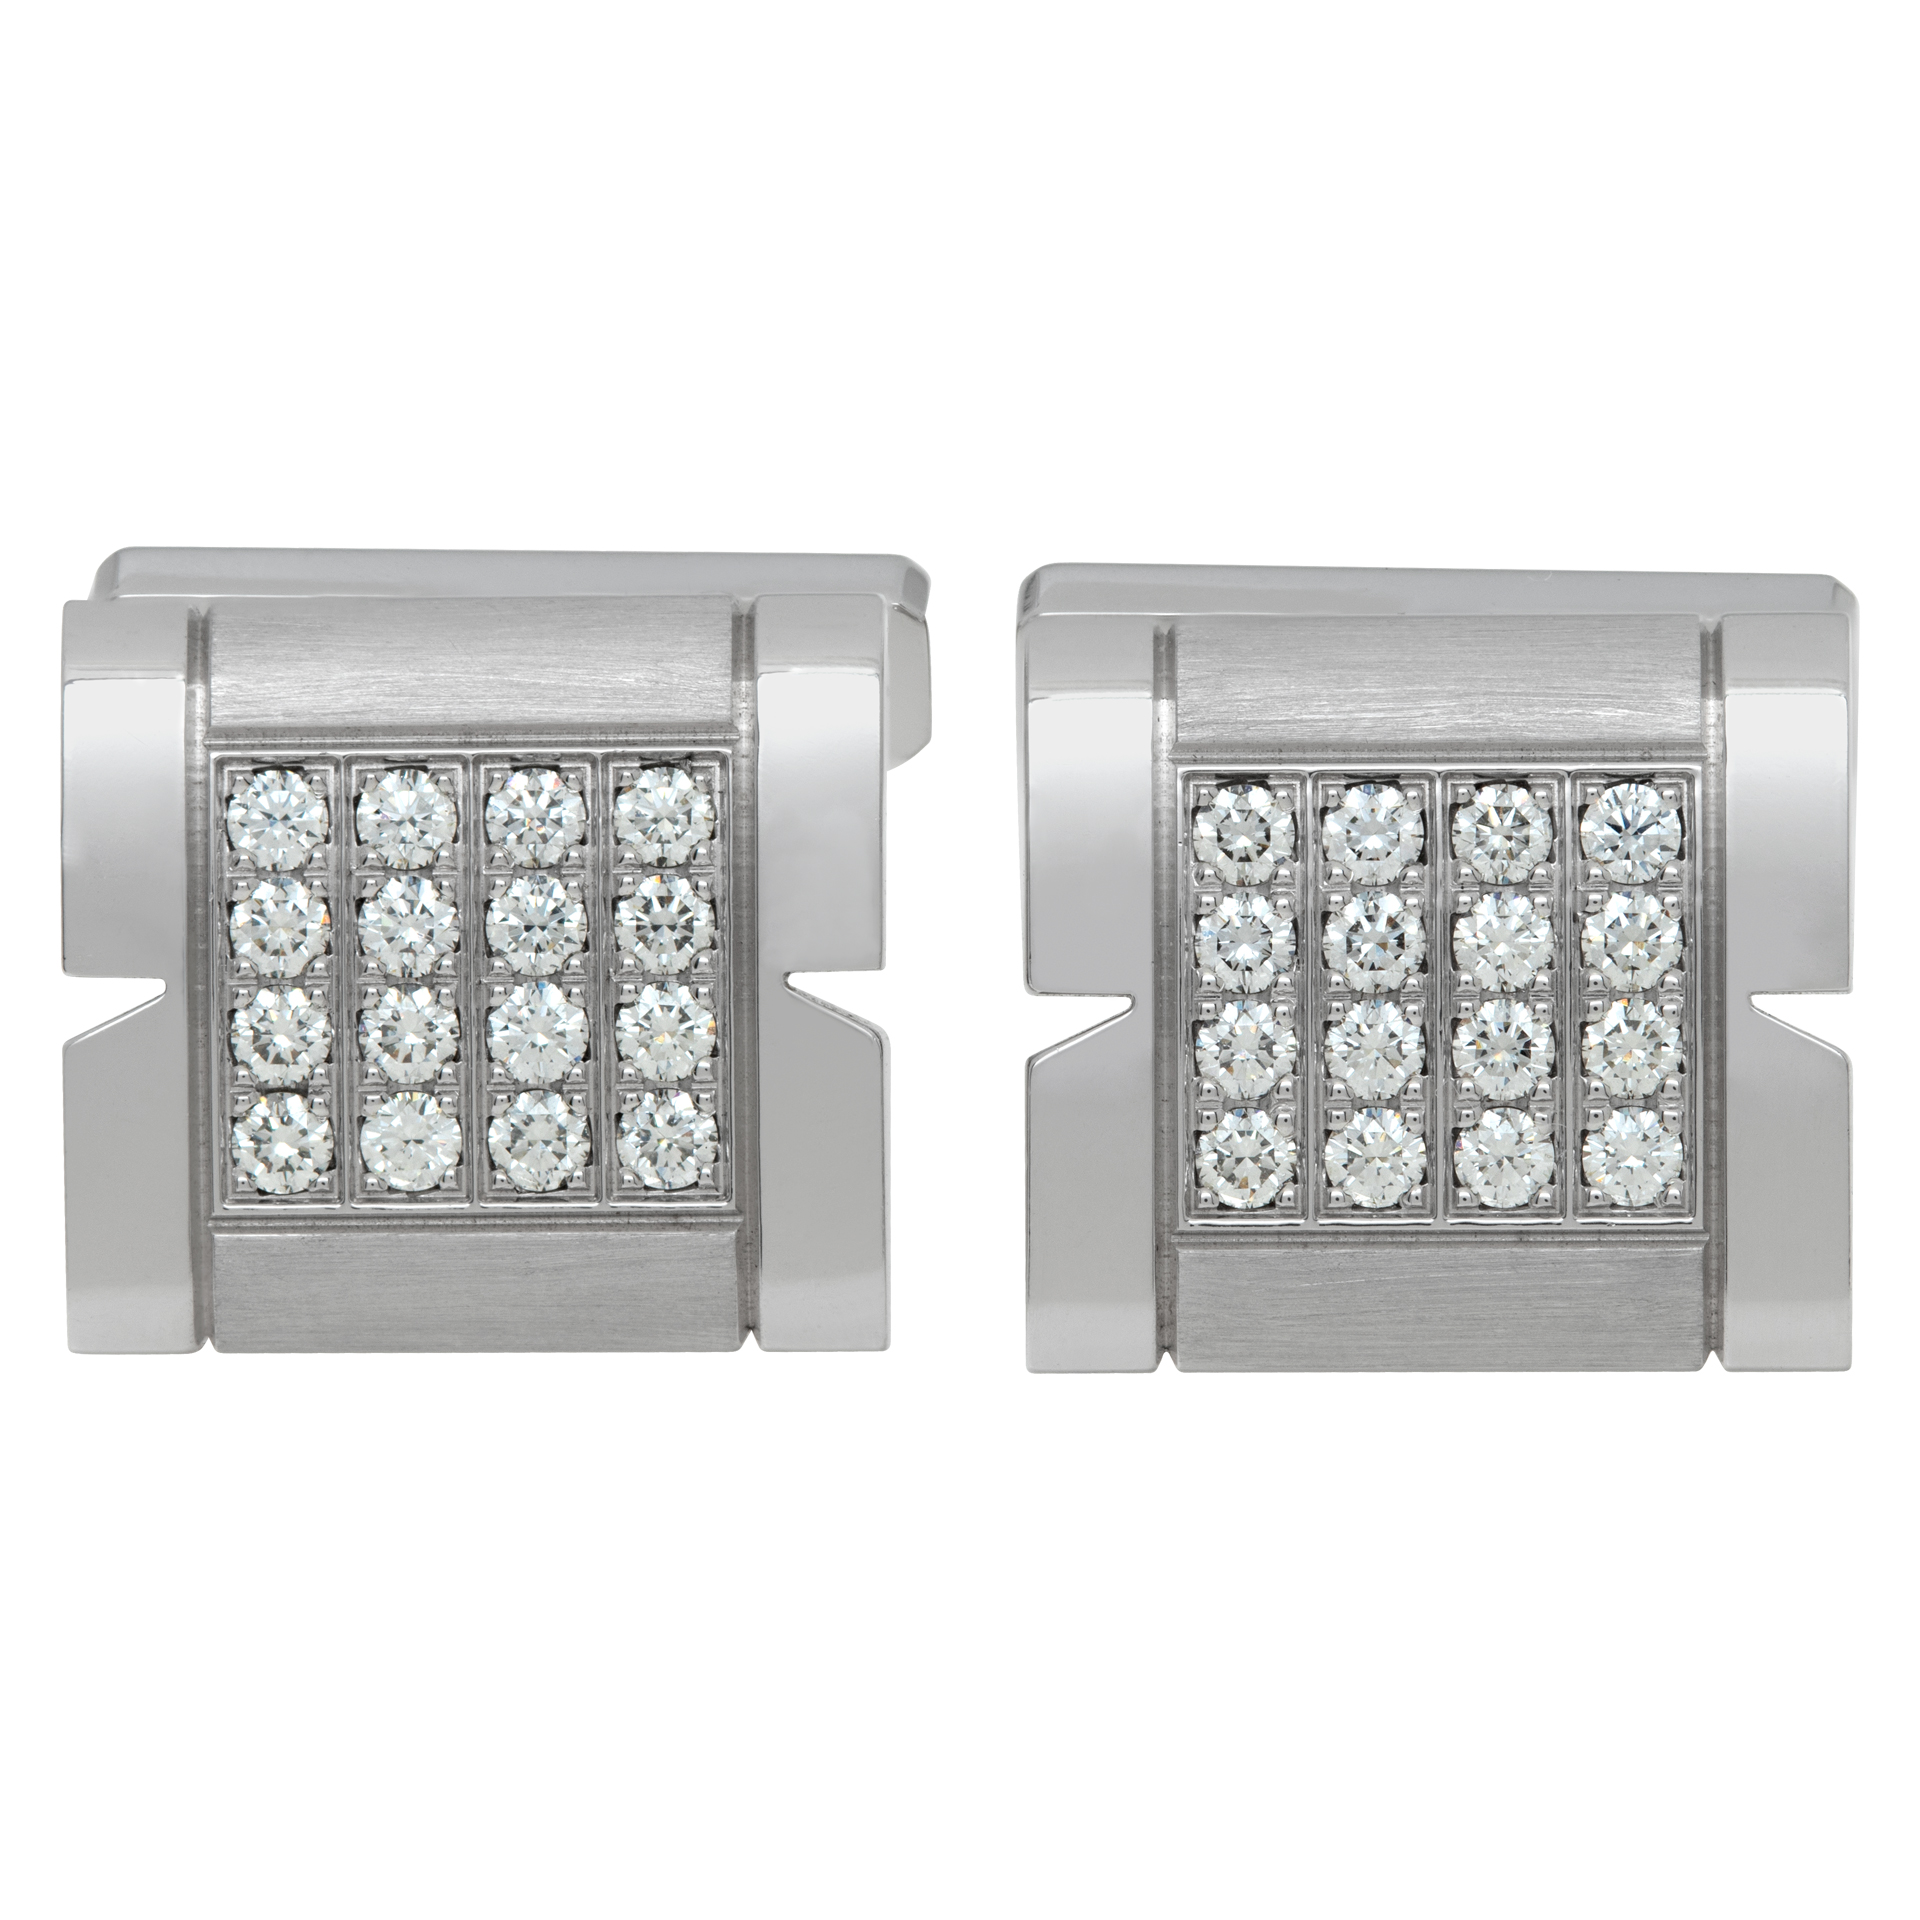 Cartier Tank Francaise cufflinks in 18k white gold with diamonds